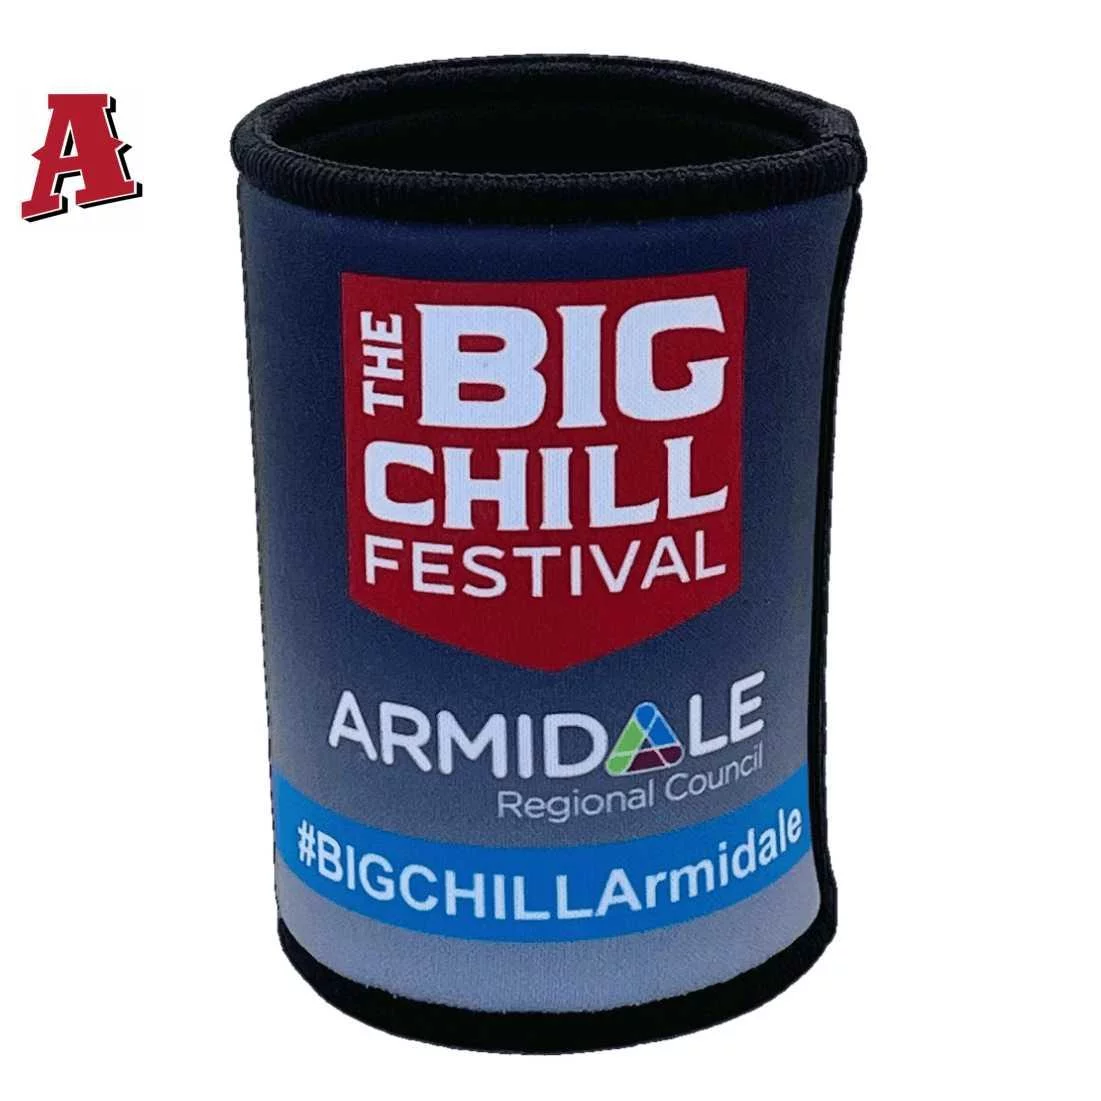 The Big Chill Festival Armidale NSW Aussie Custom Stubby Holder - Koozie - 5mm Premium Neoprene with Tapped & Stitched Seams - Gradient Greys